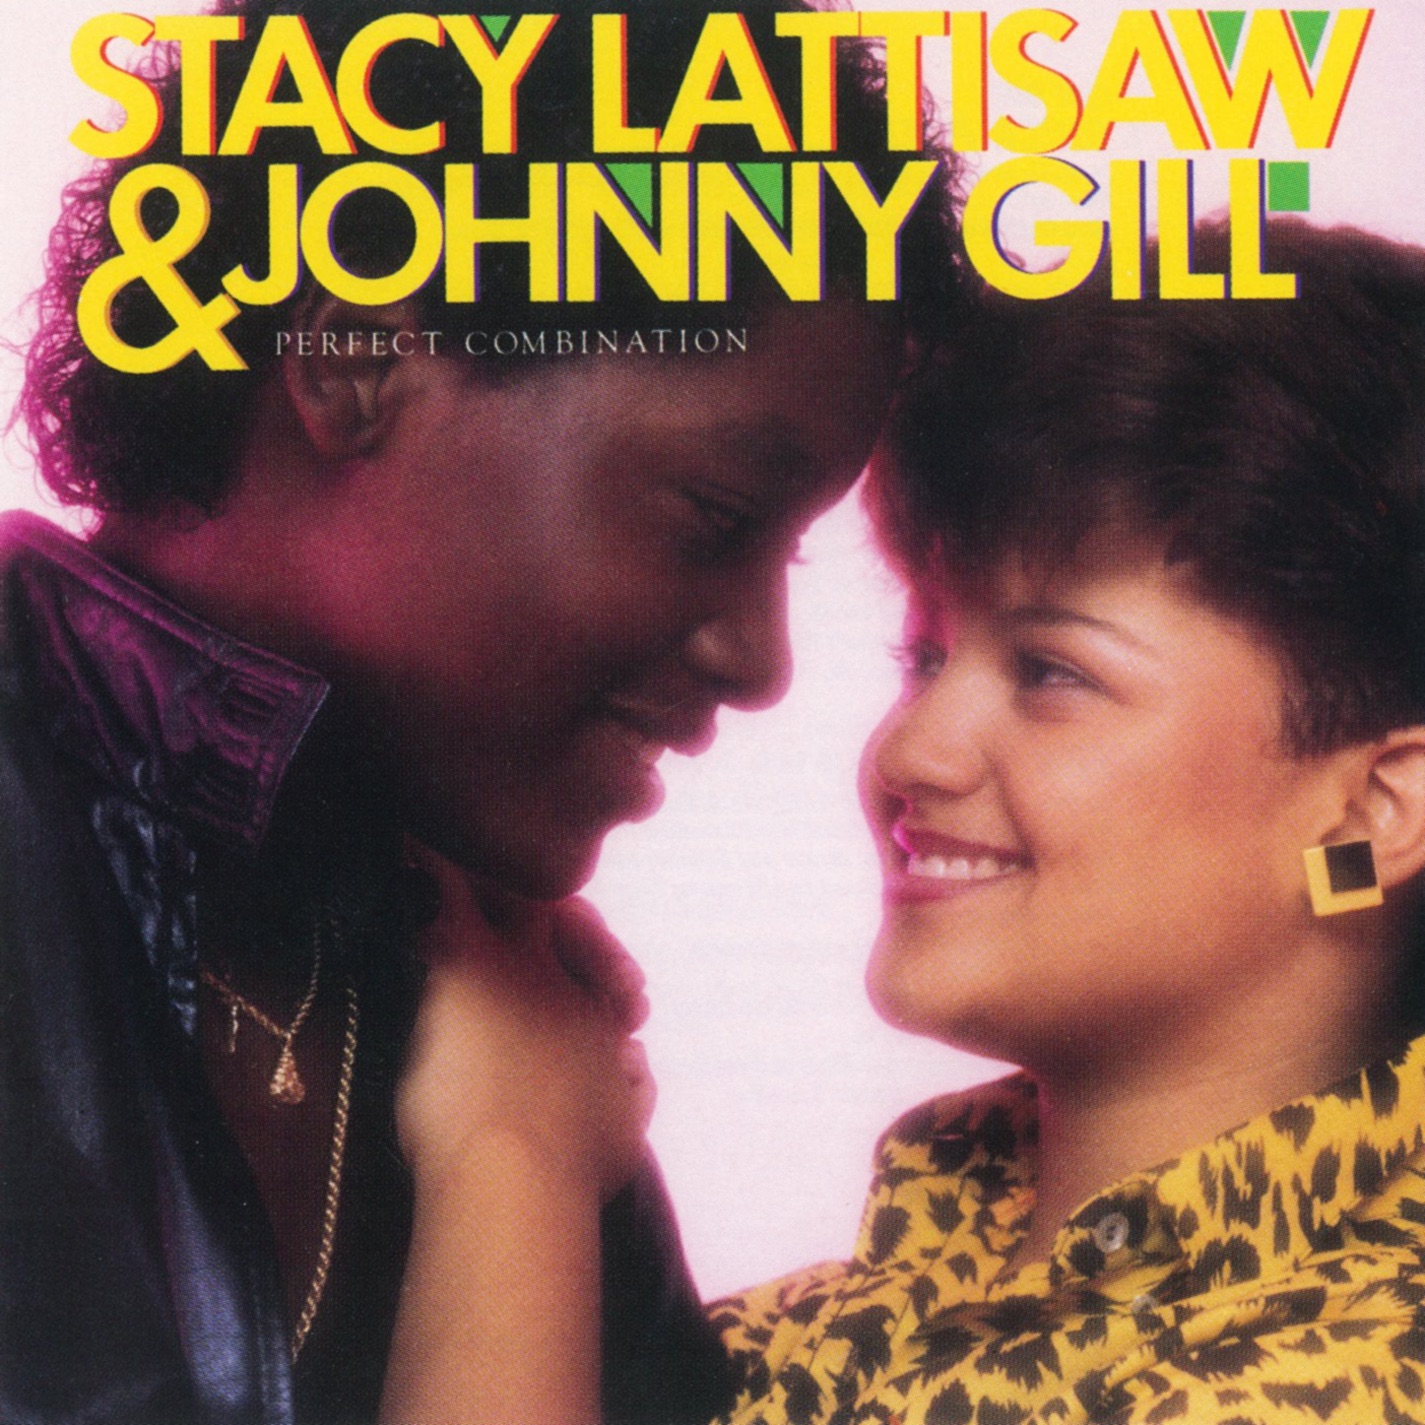 Art for Perfect Combination by Stacy Lattisaw & Johnny Gill